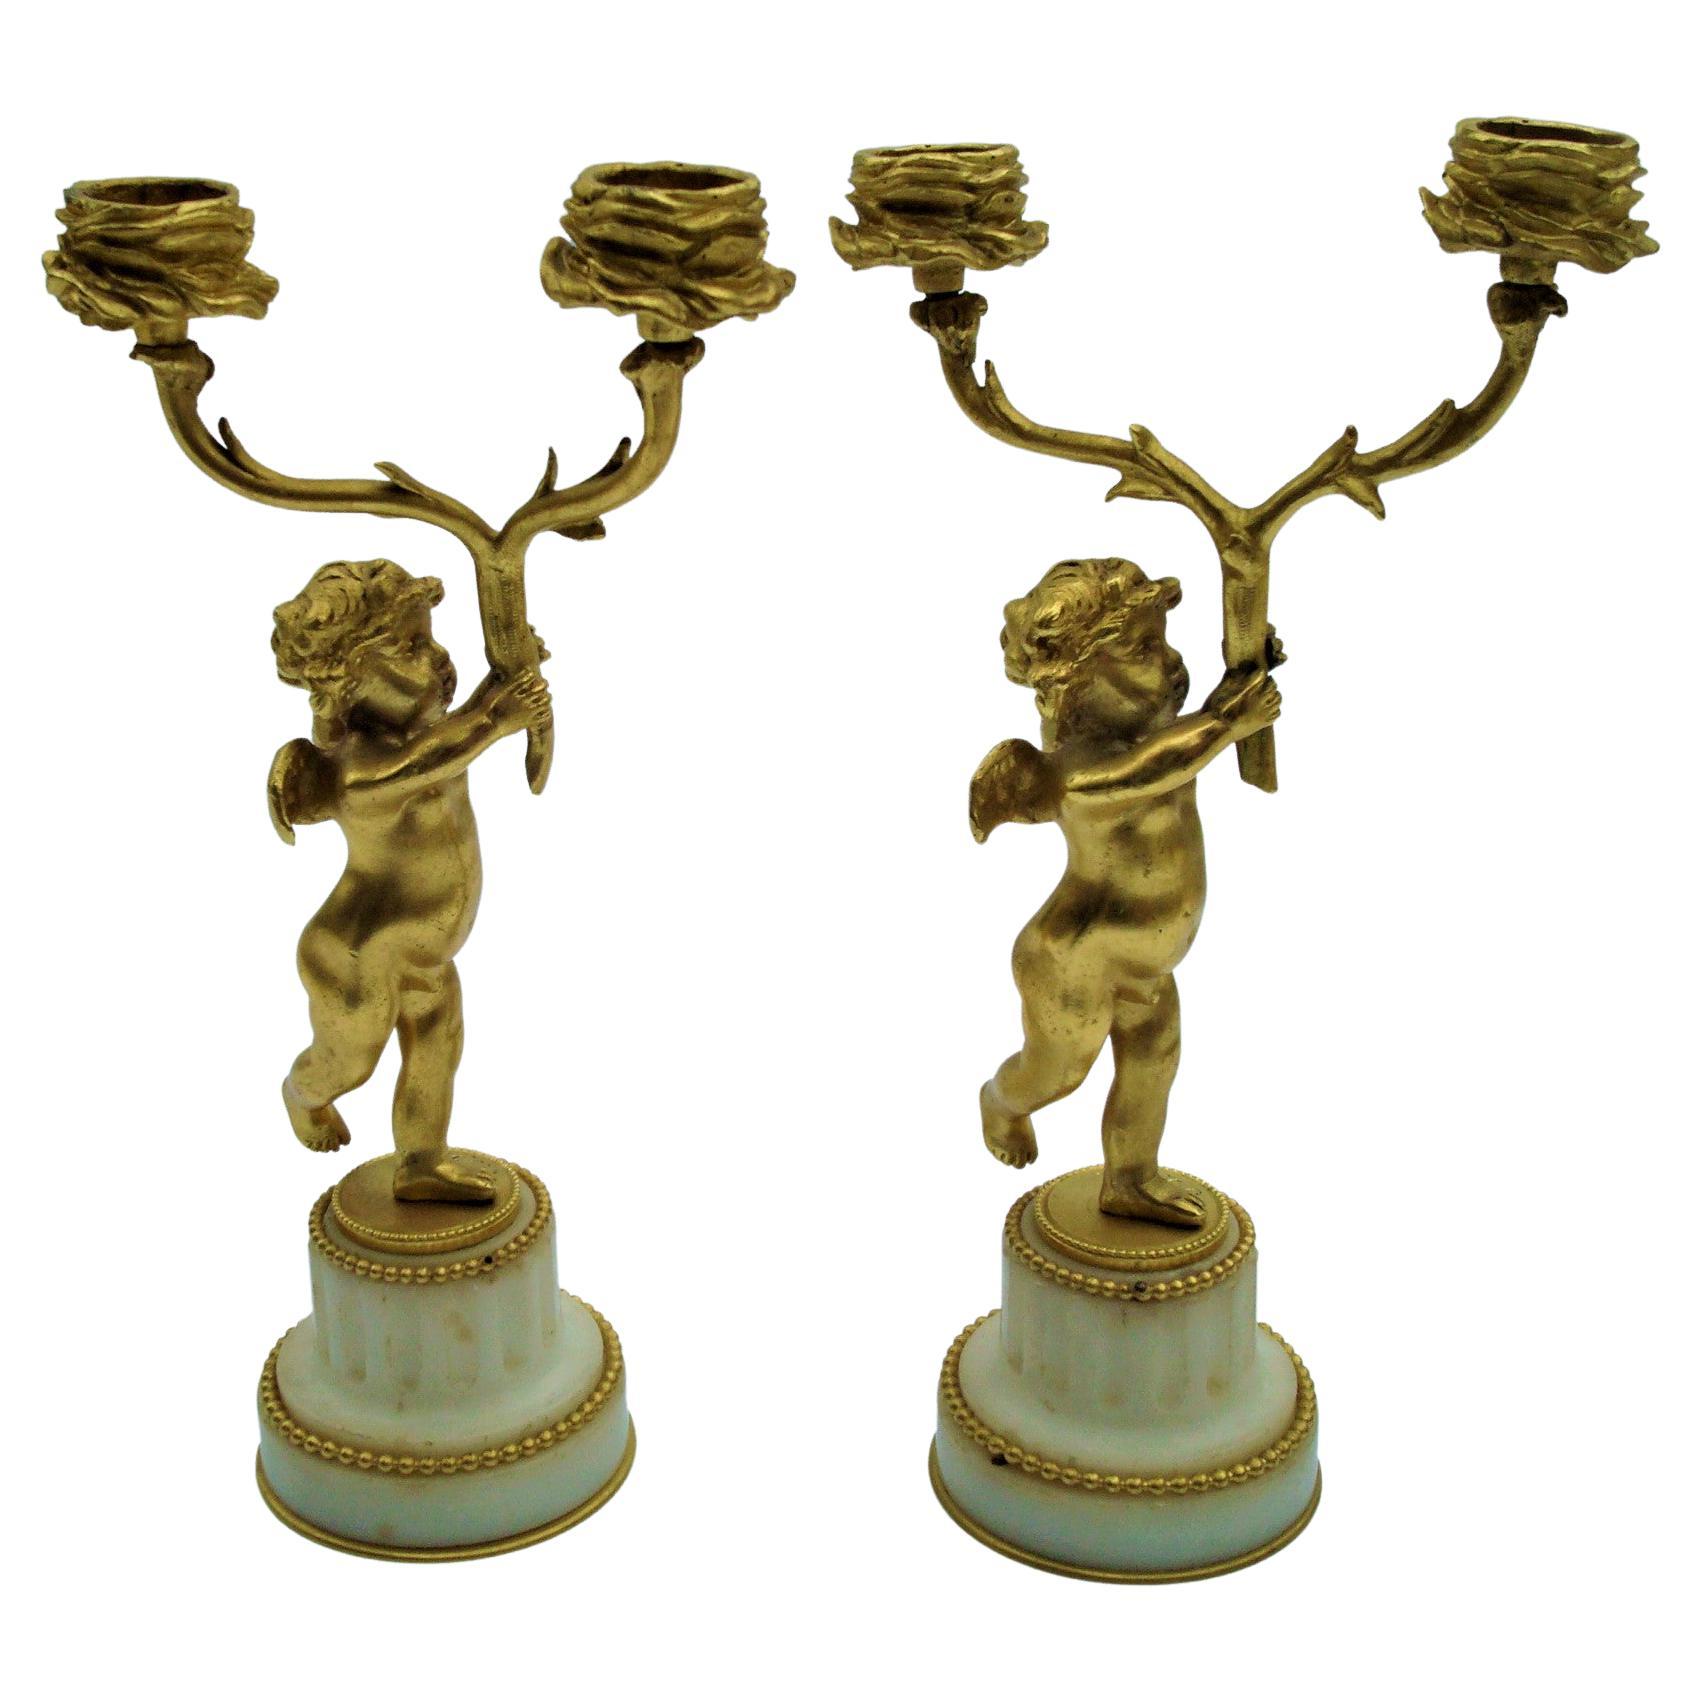 19th Century Bronze Gold-Plated Two-Arm Cherub Figural Candelabras, F. Linke For Sale